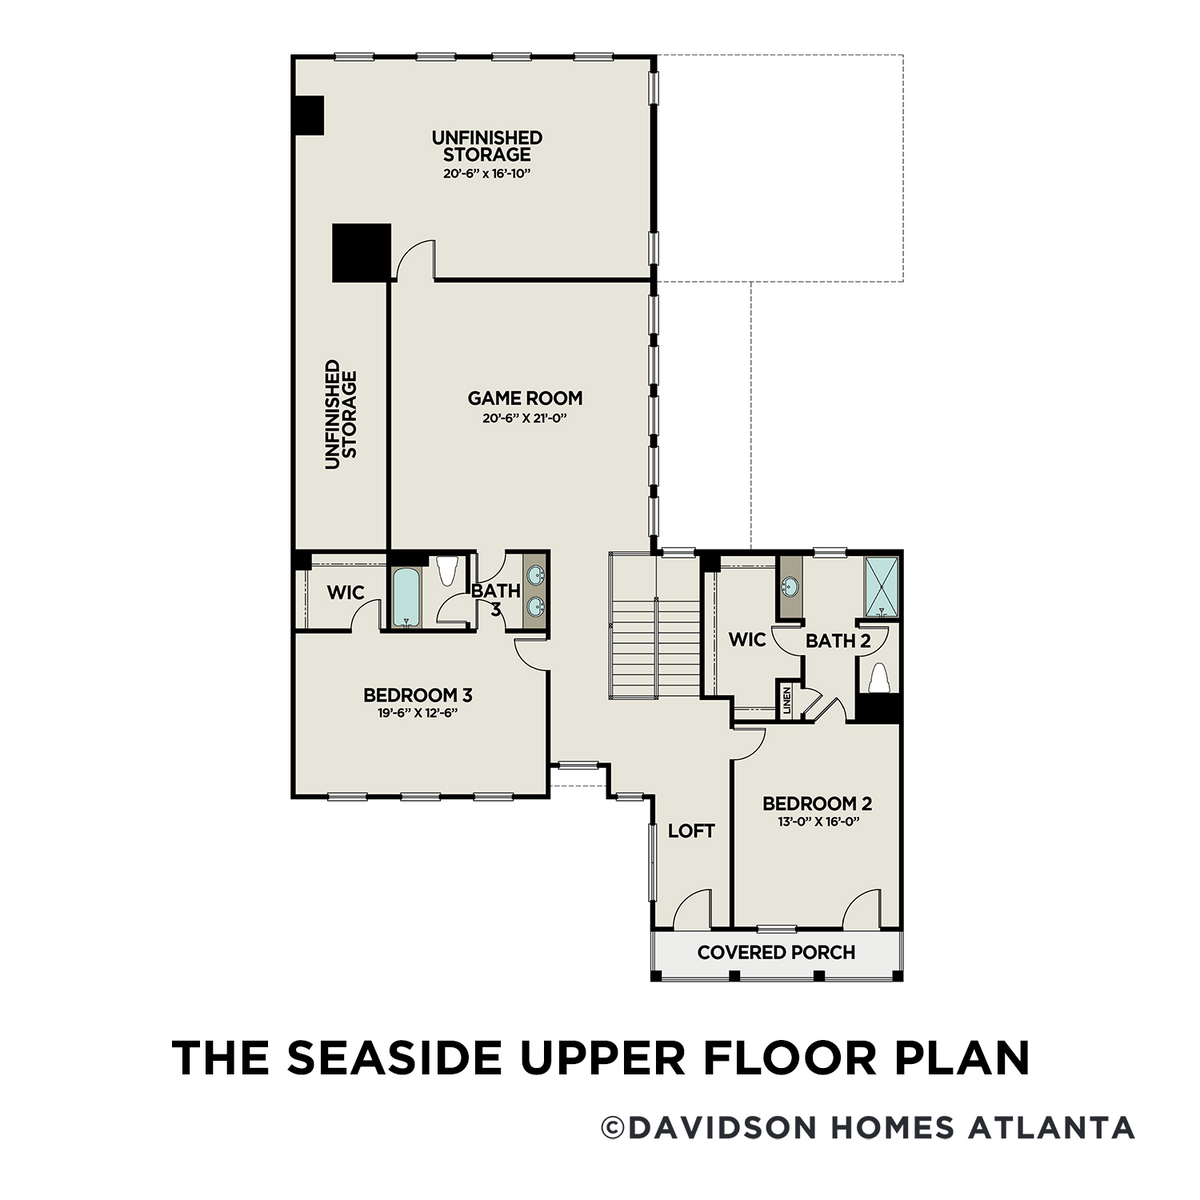 2 - The Seaside A floor plan layout for 89 Batten Board Way in Davidson Homes' The Village at Towne Lake community.